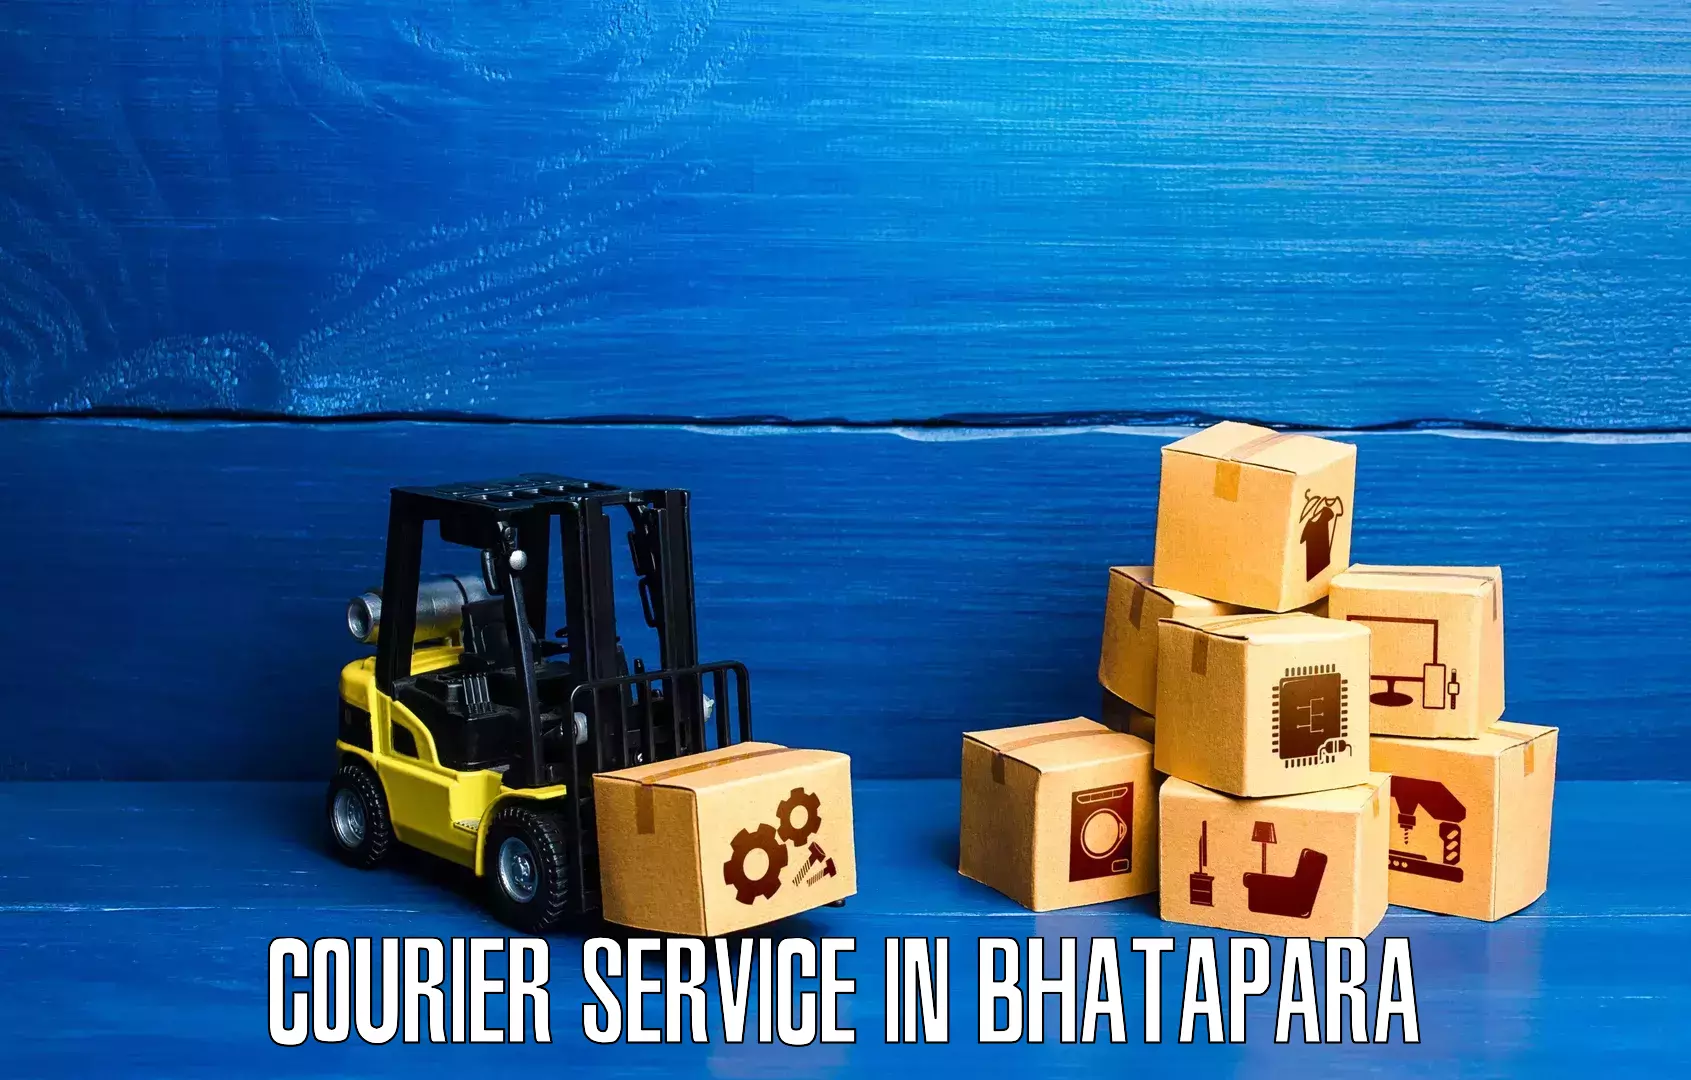 Express package delivery in Bhatapara